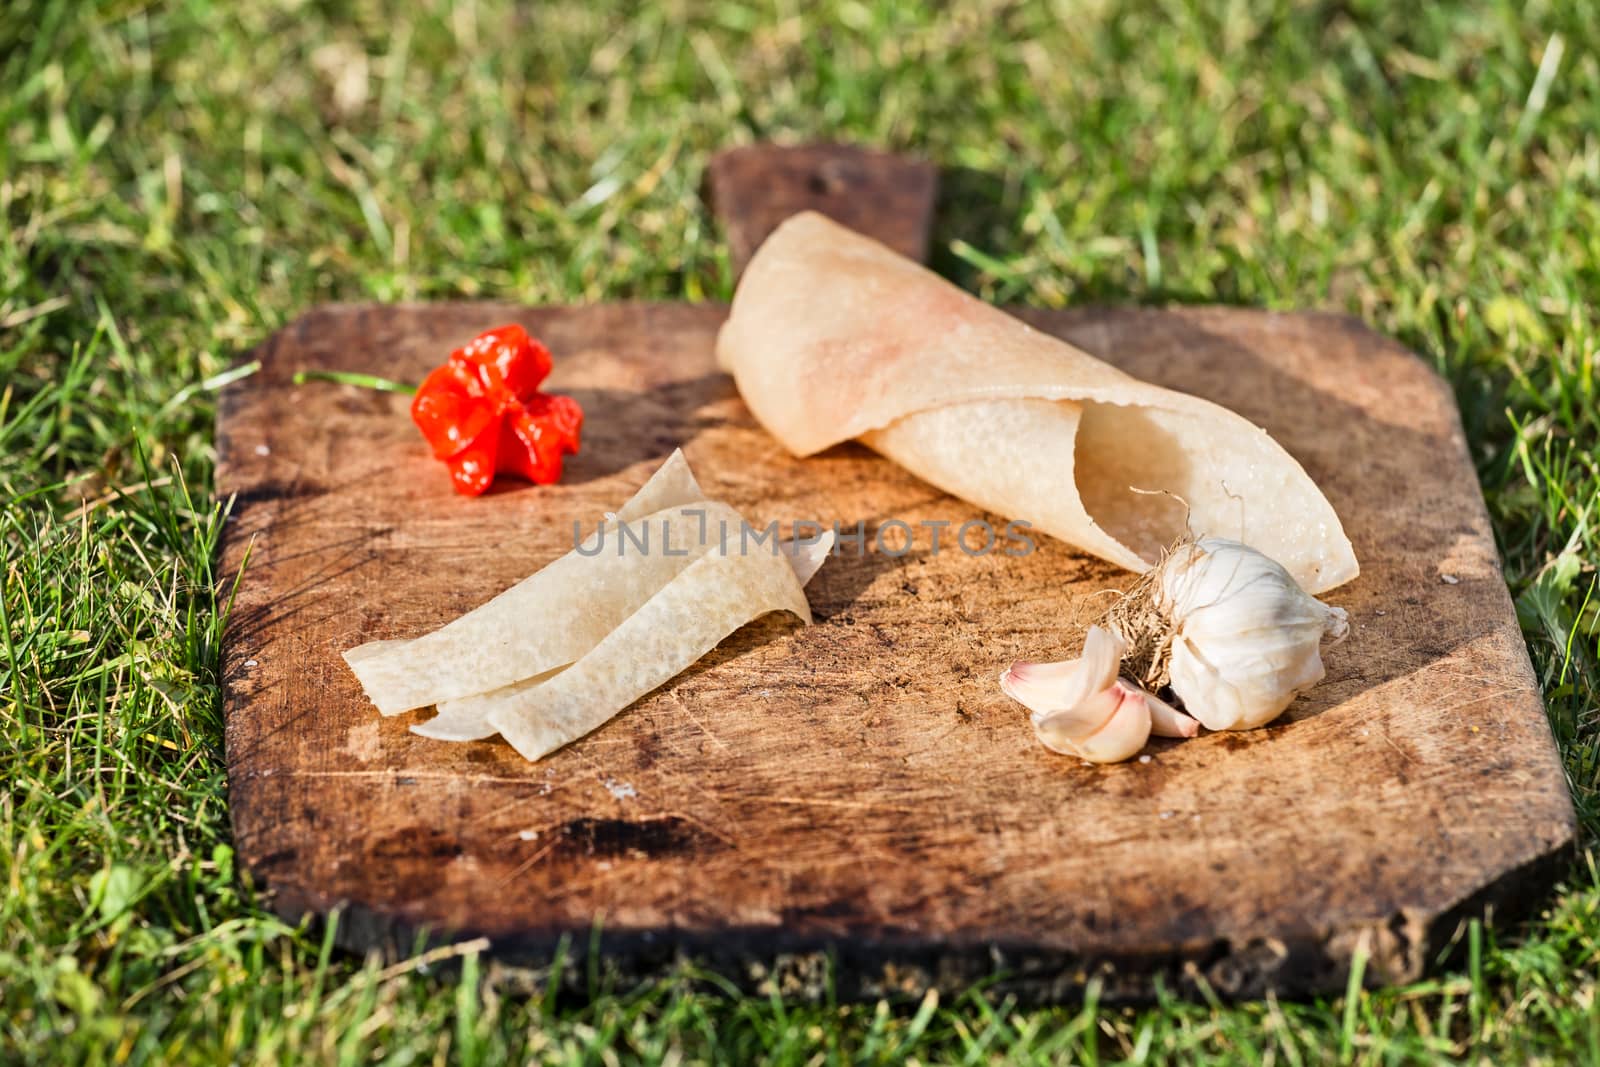 Pig skin slices, garlic and pepper on wooden plate